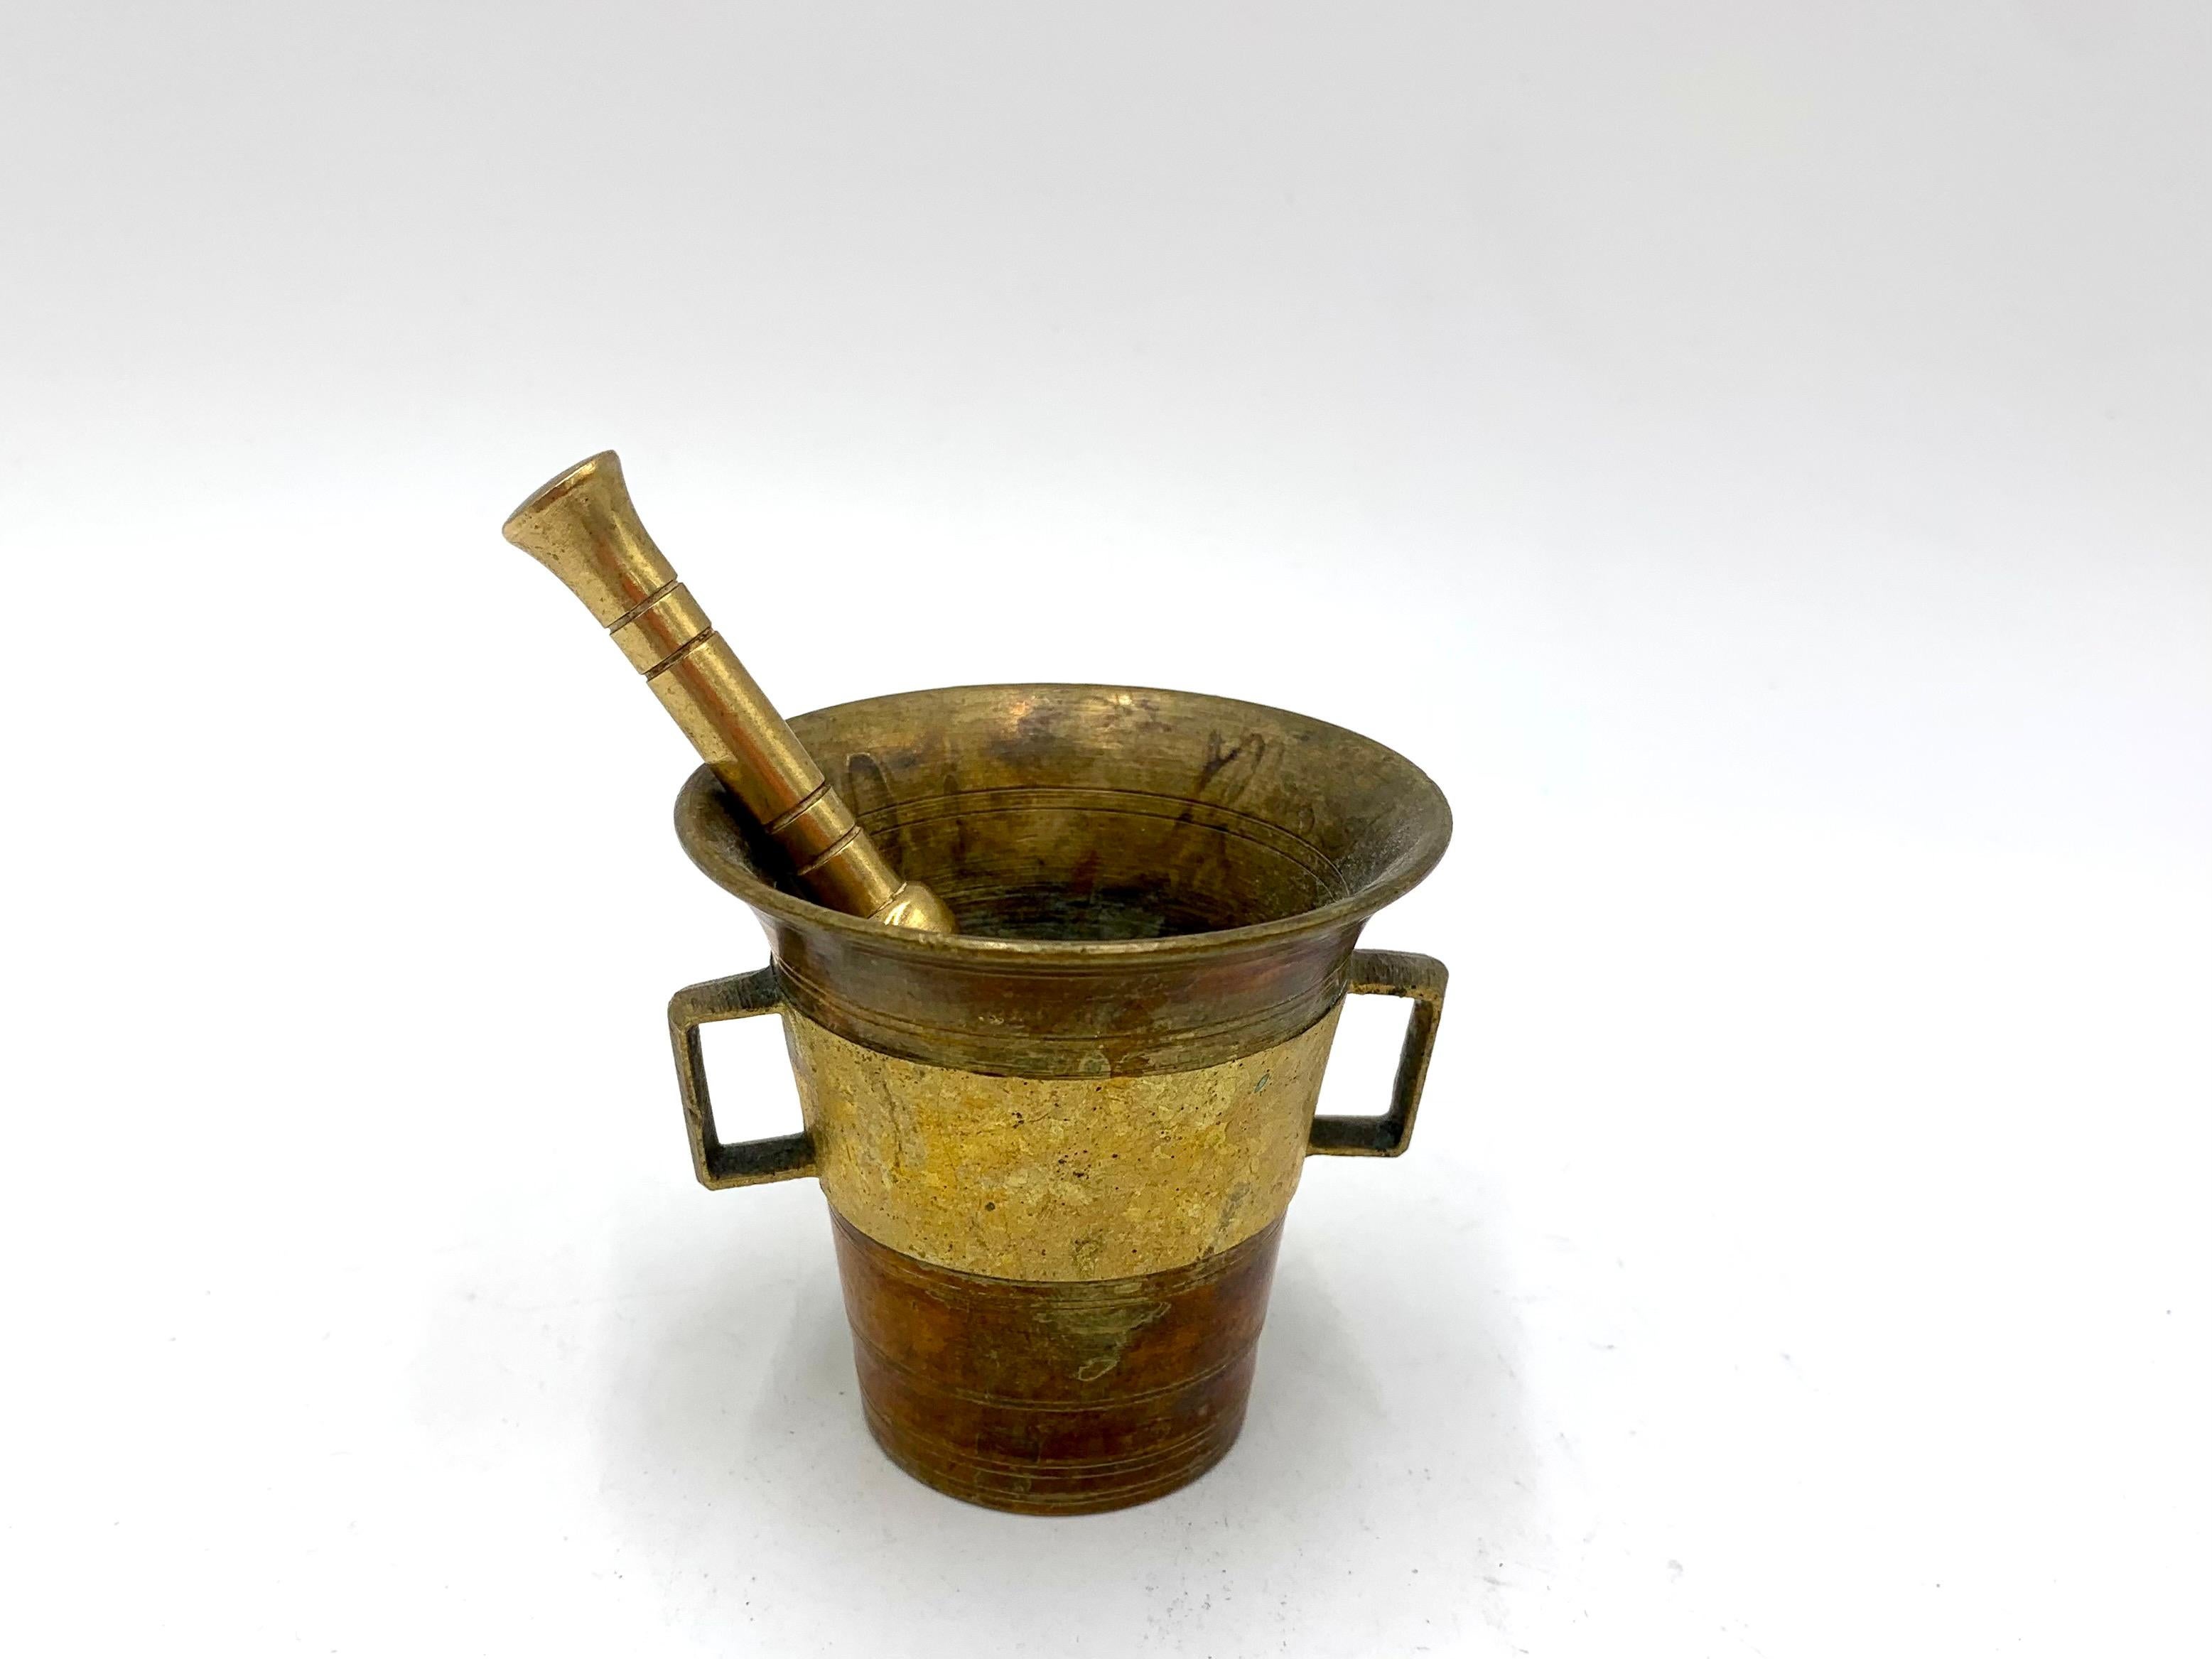 Brass mortar and pestle
height 6 cm, diameter 6.5 cm
very good condition.
 